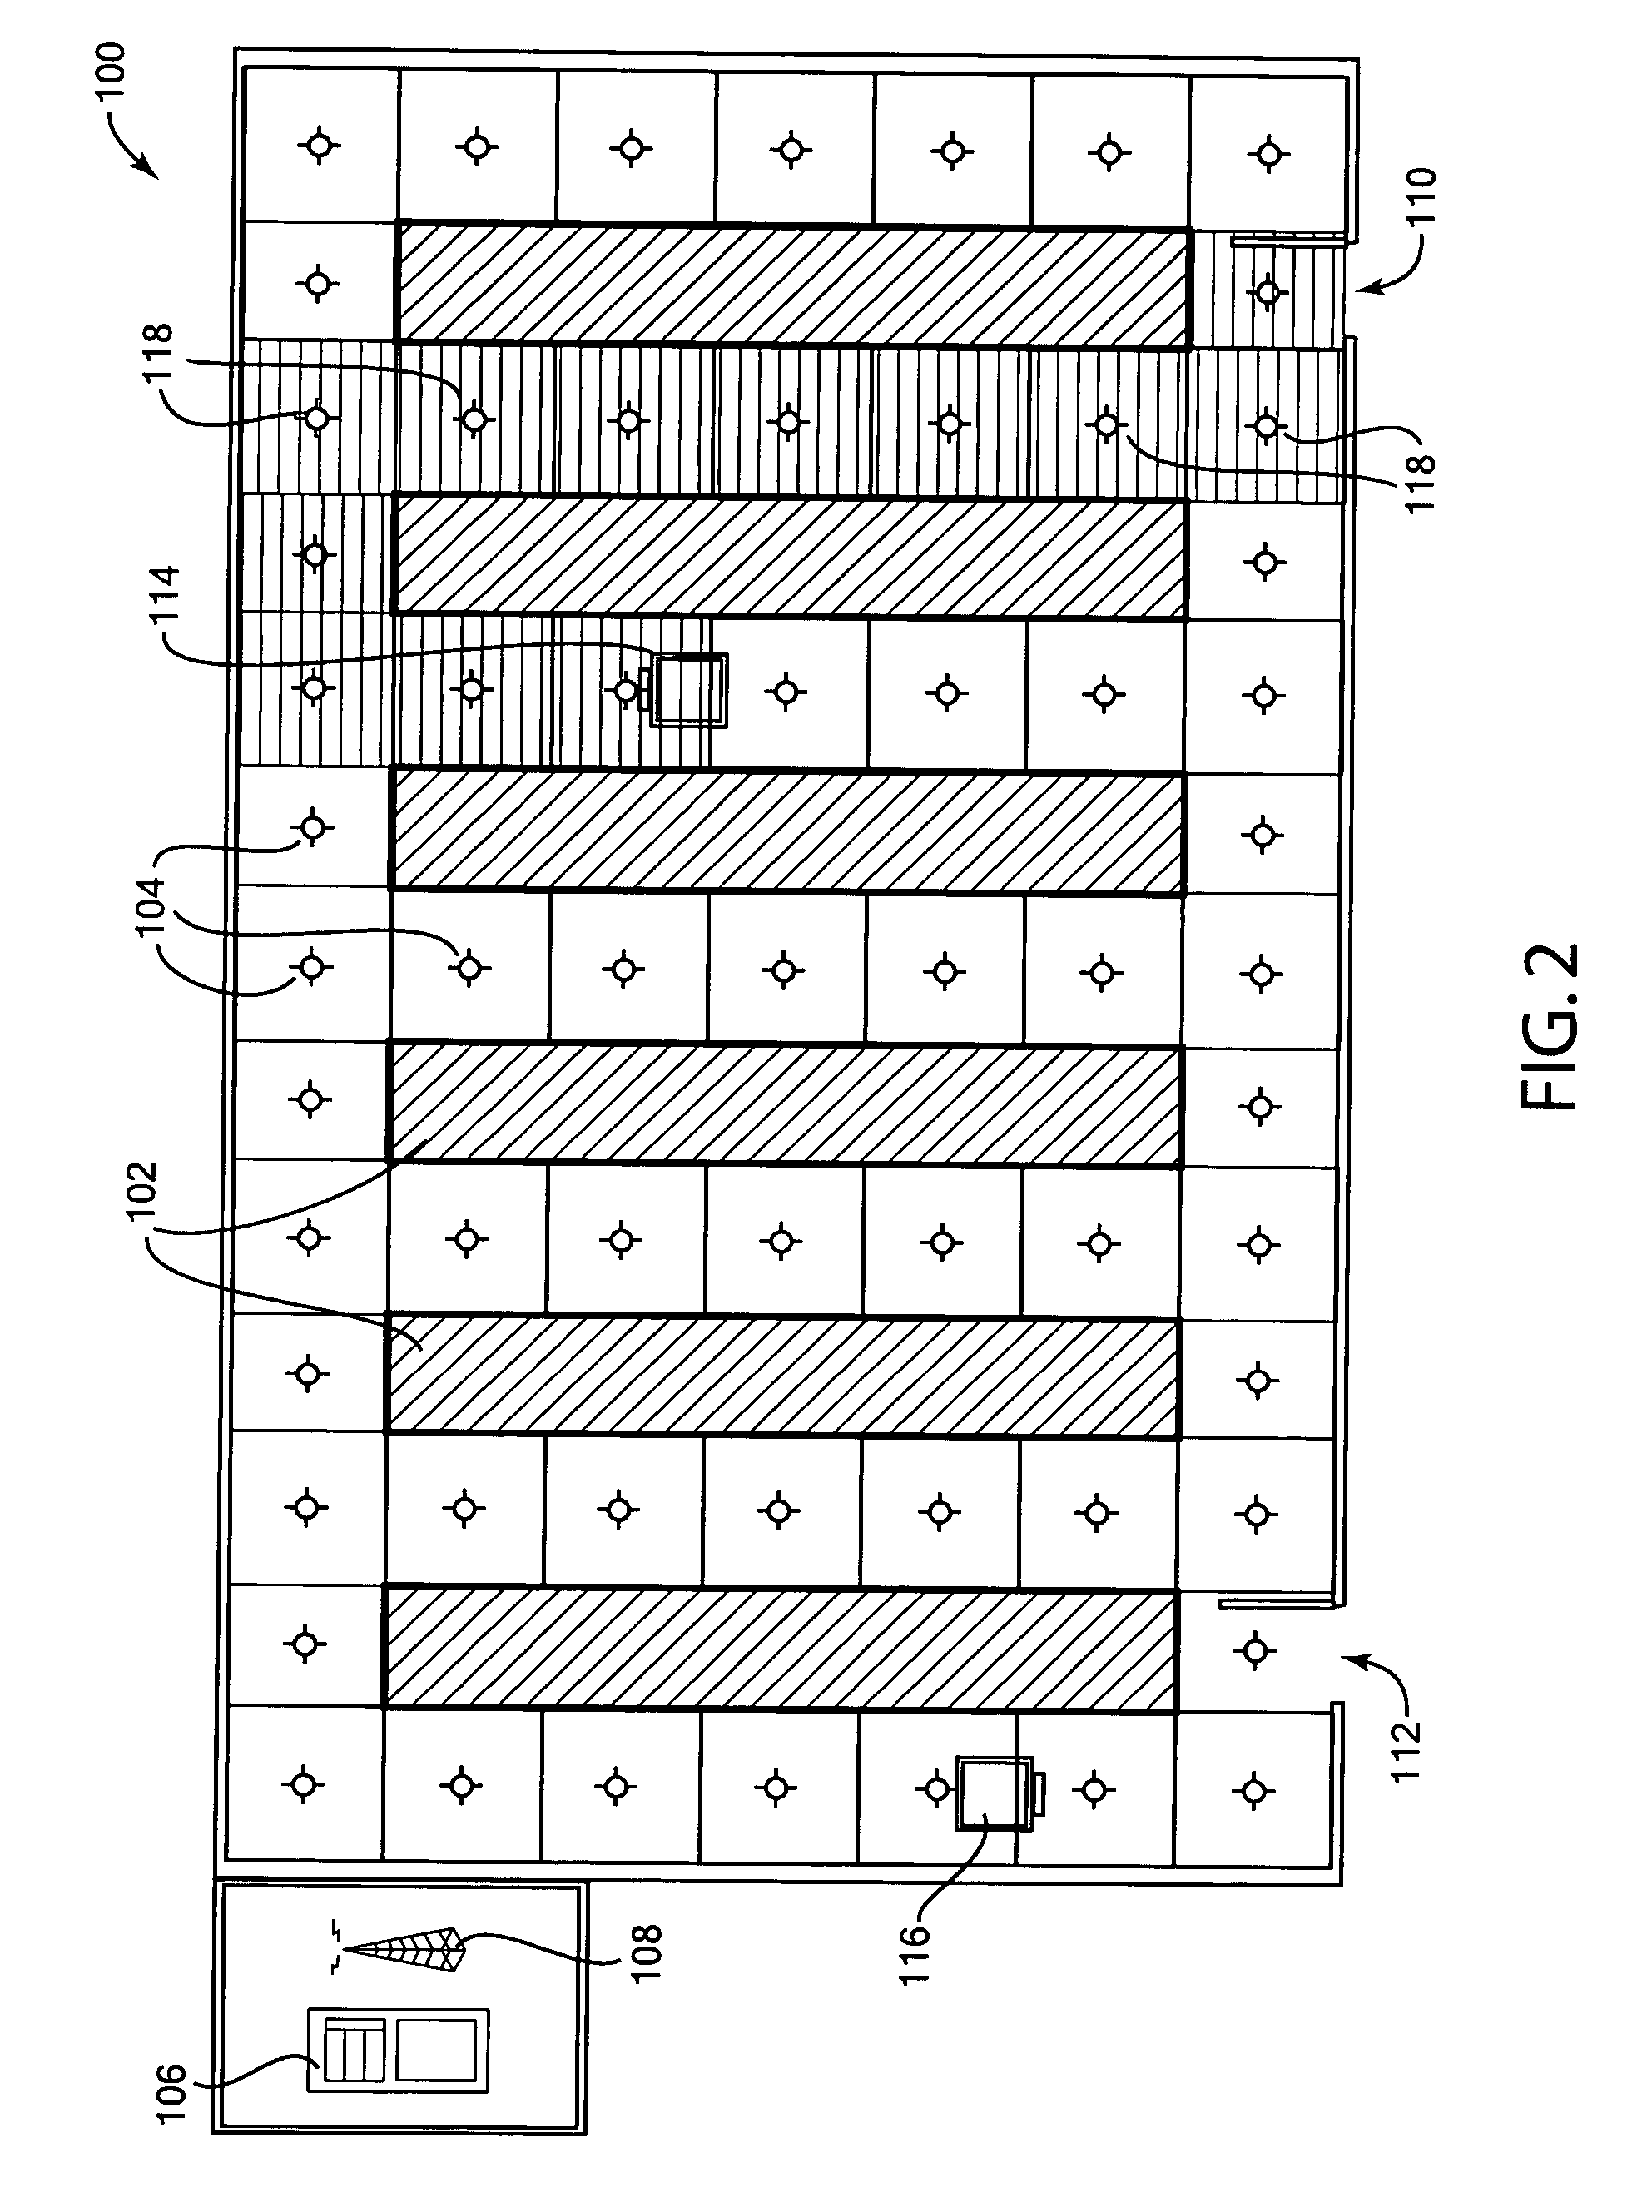 Method and system for monitoring location based service emitter instructure